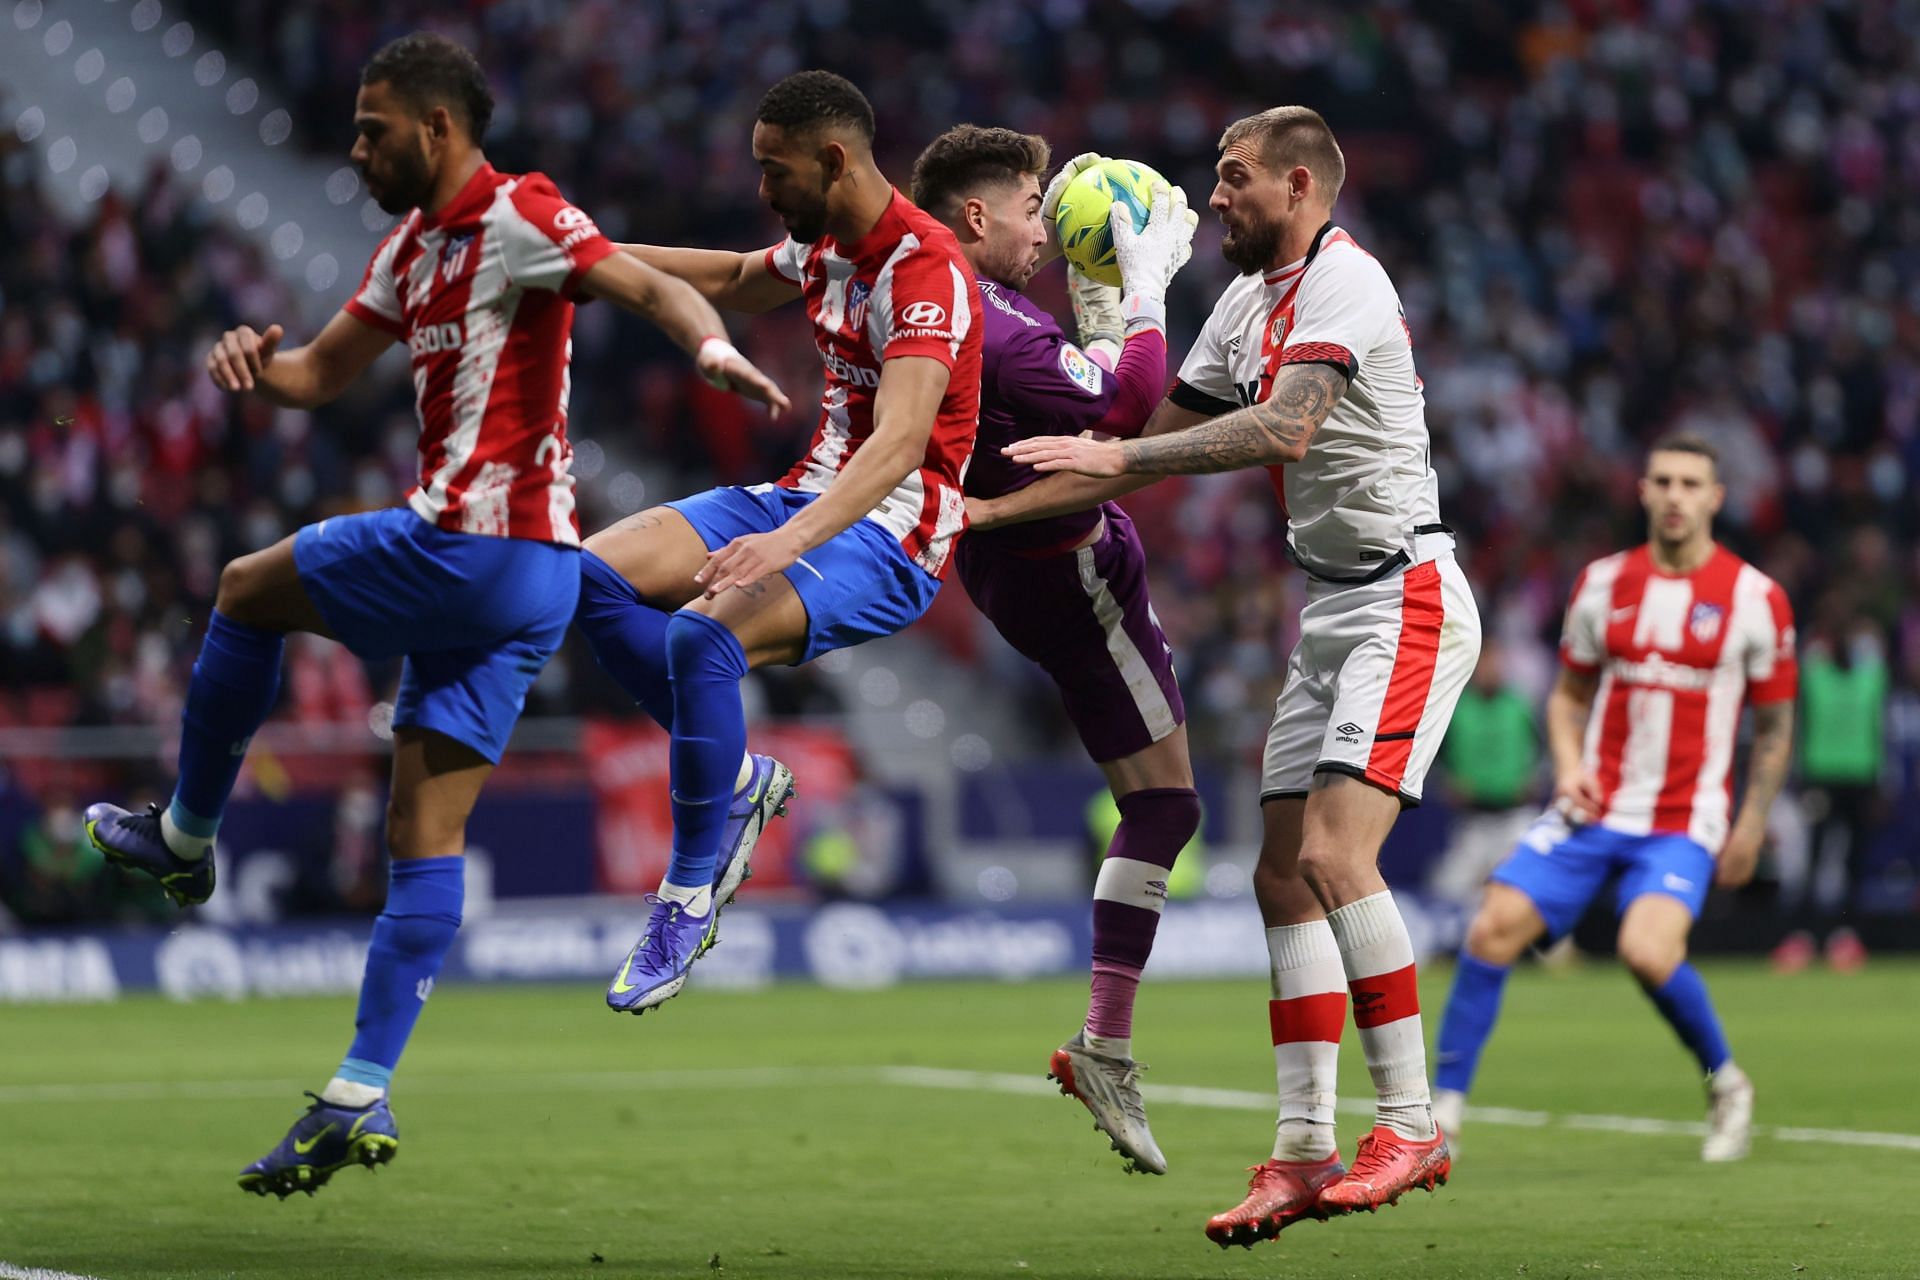 Atletico Madrid take on Rayo Vallecano this weekend